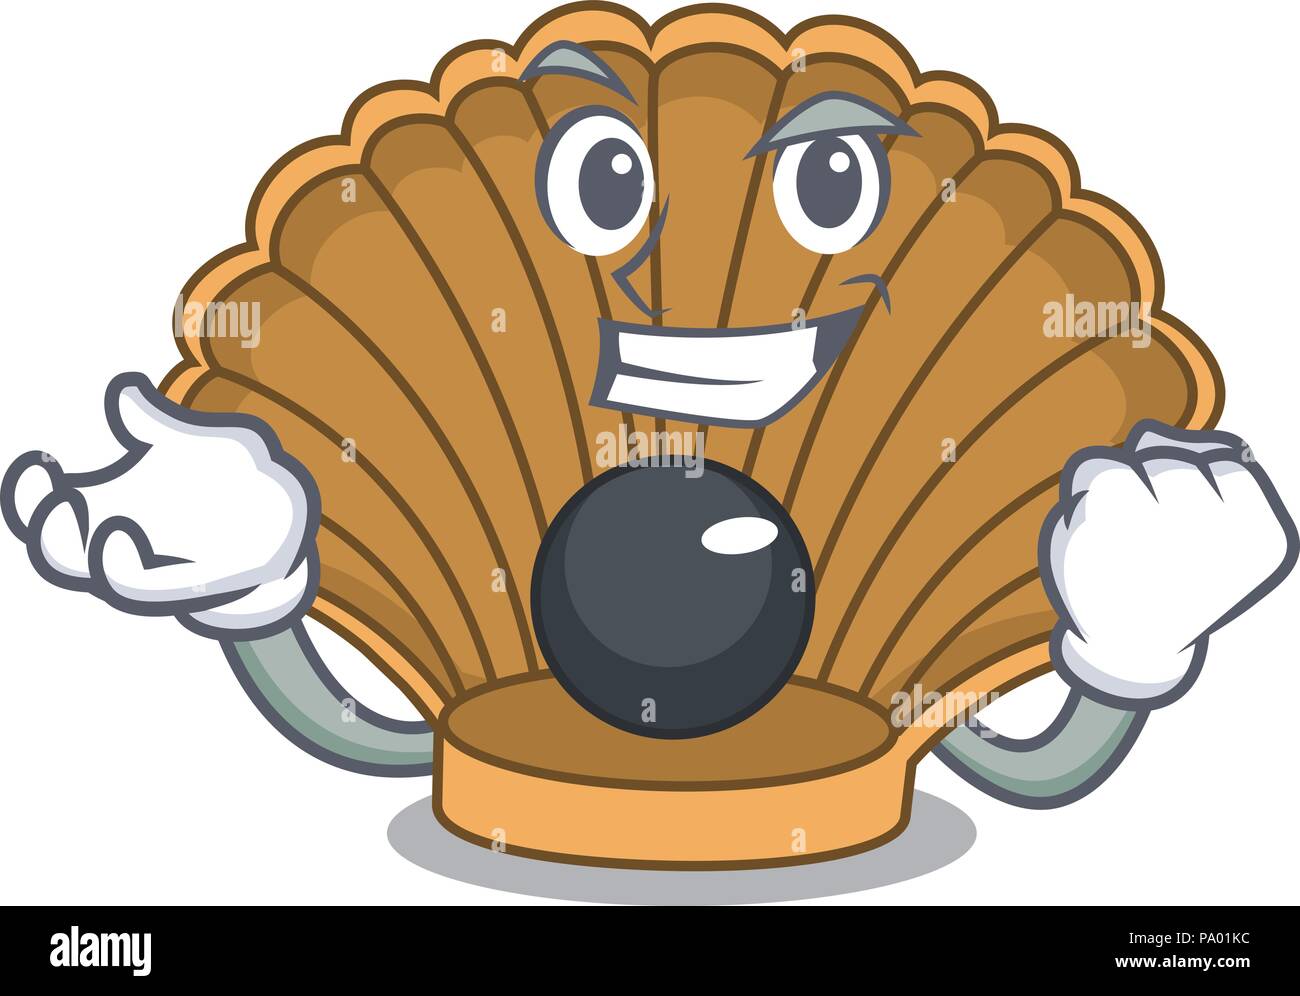 Successful shell with pearl character cartoon Stock Vector